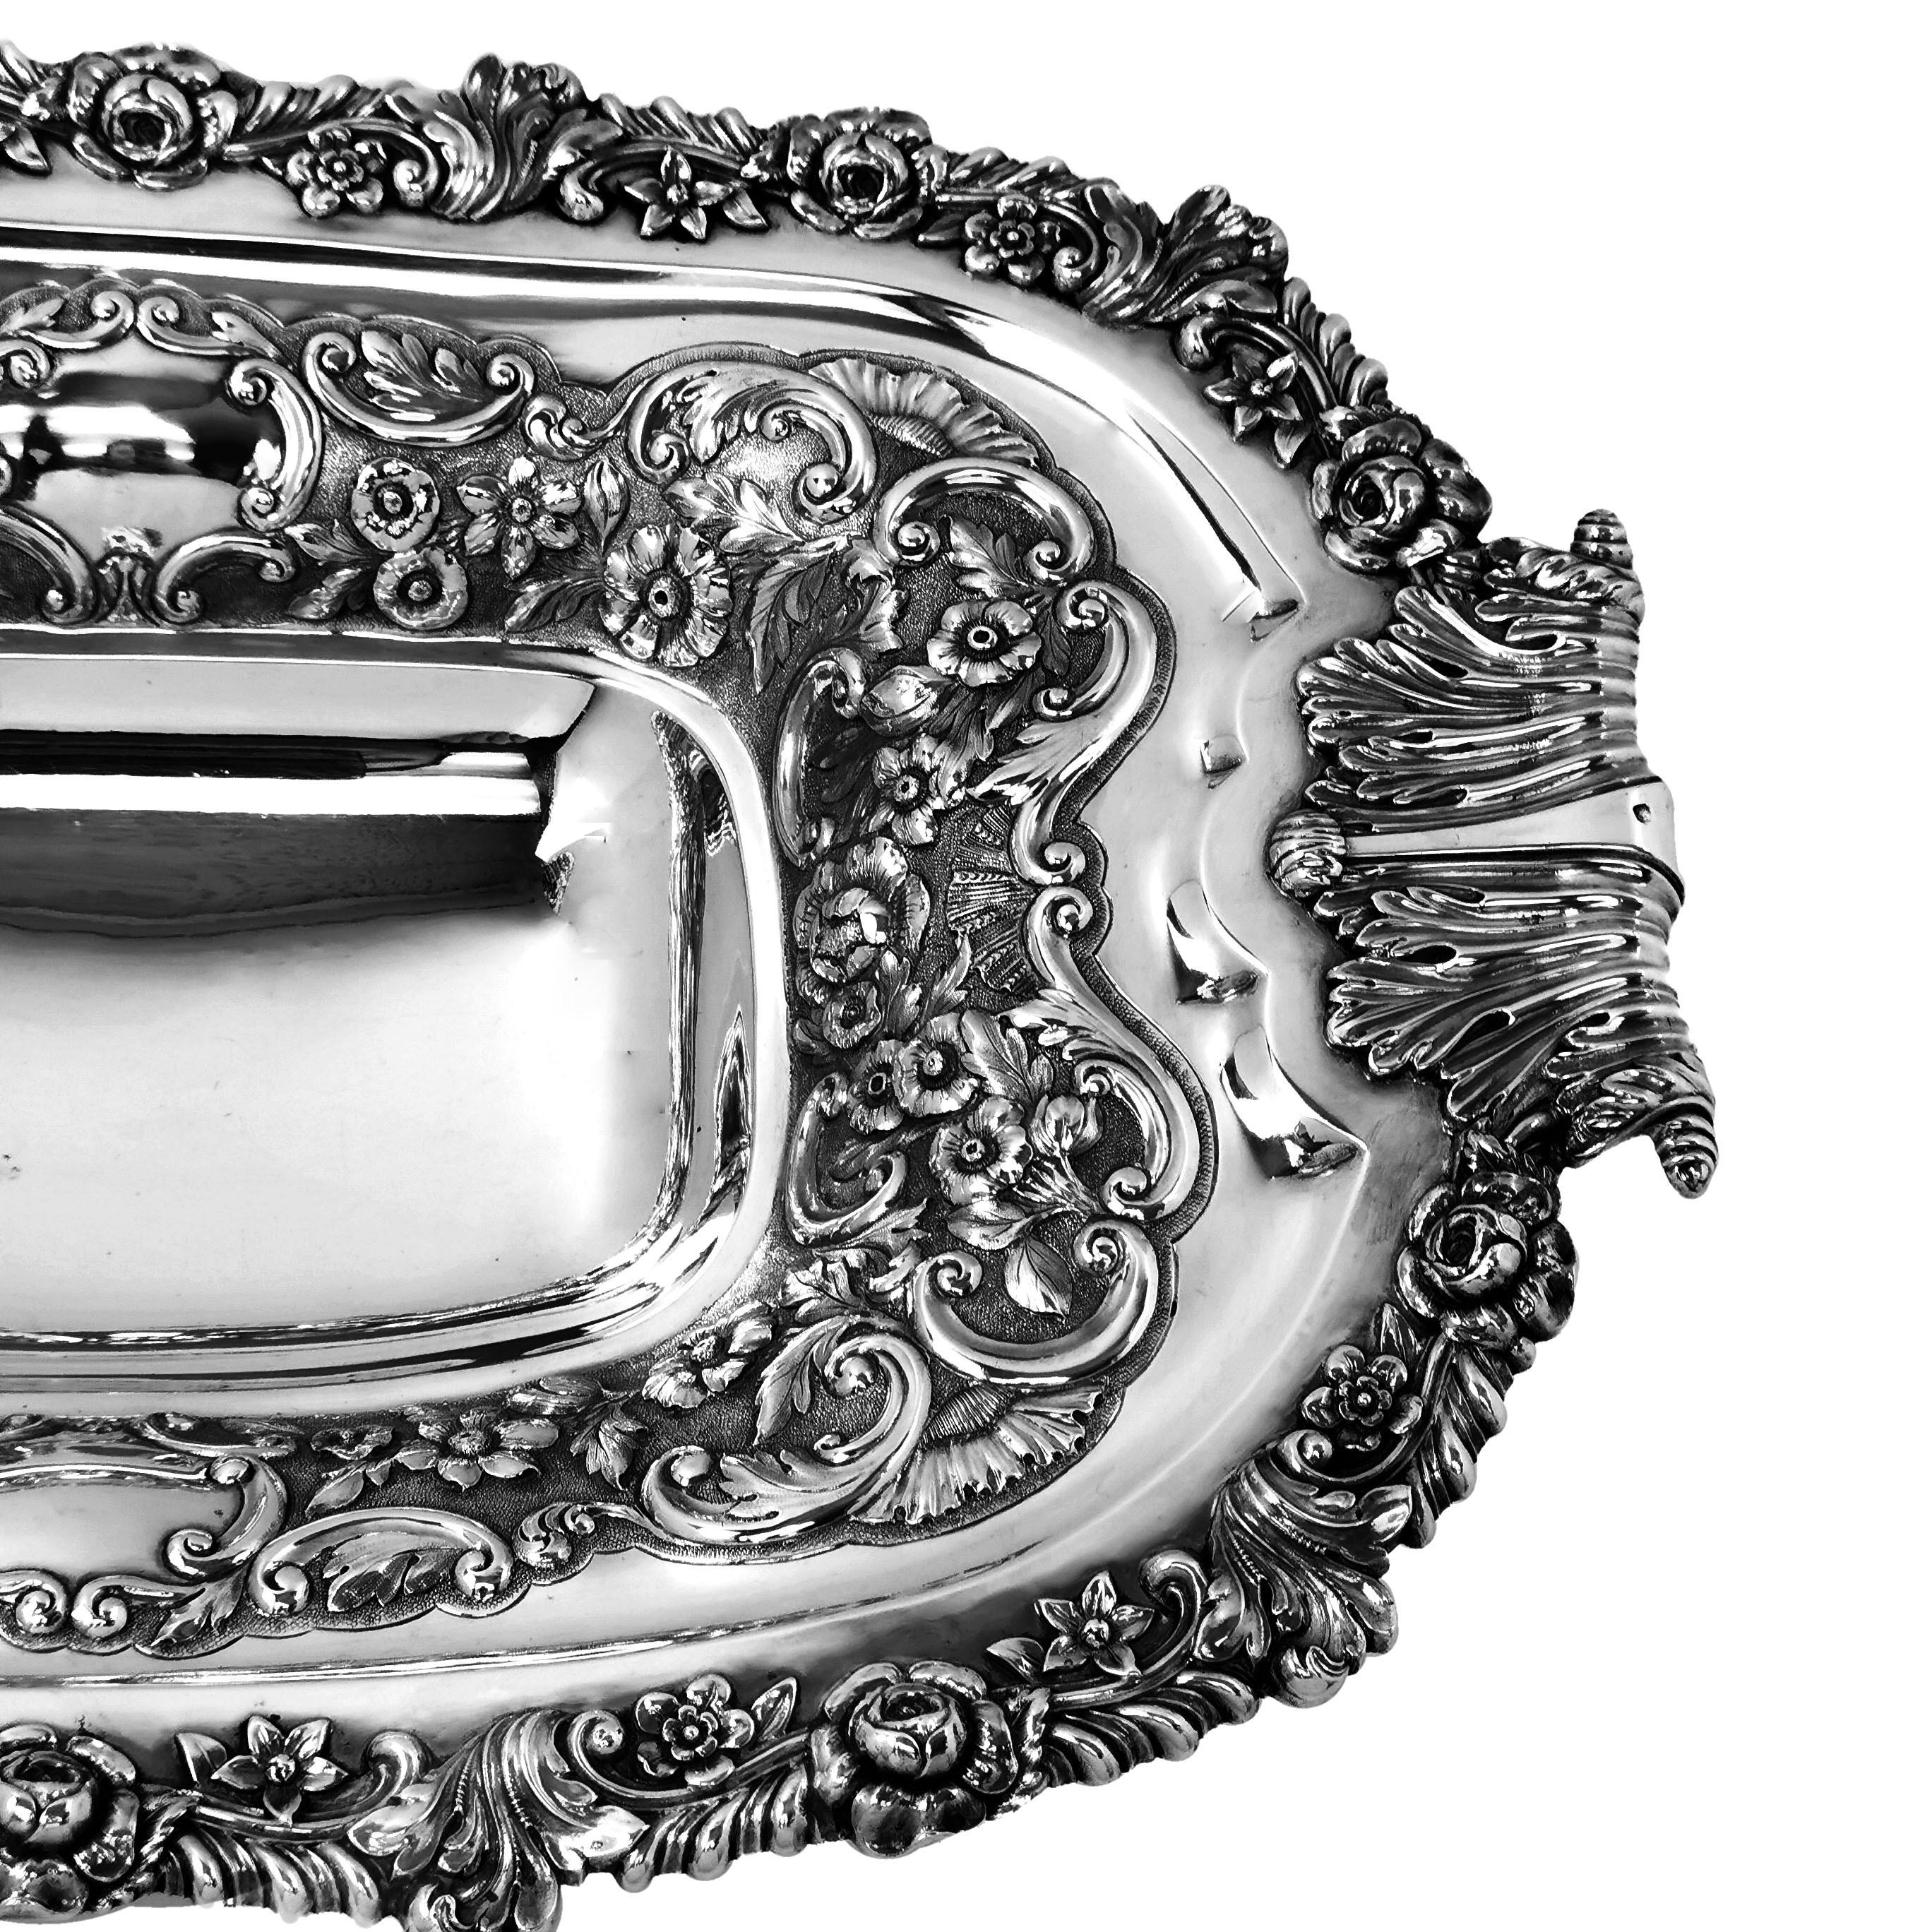 19th Century Antique Georgian Sterling Silver Bowl or Dish, 1822